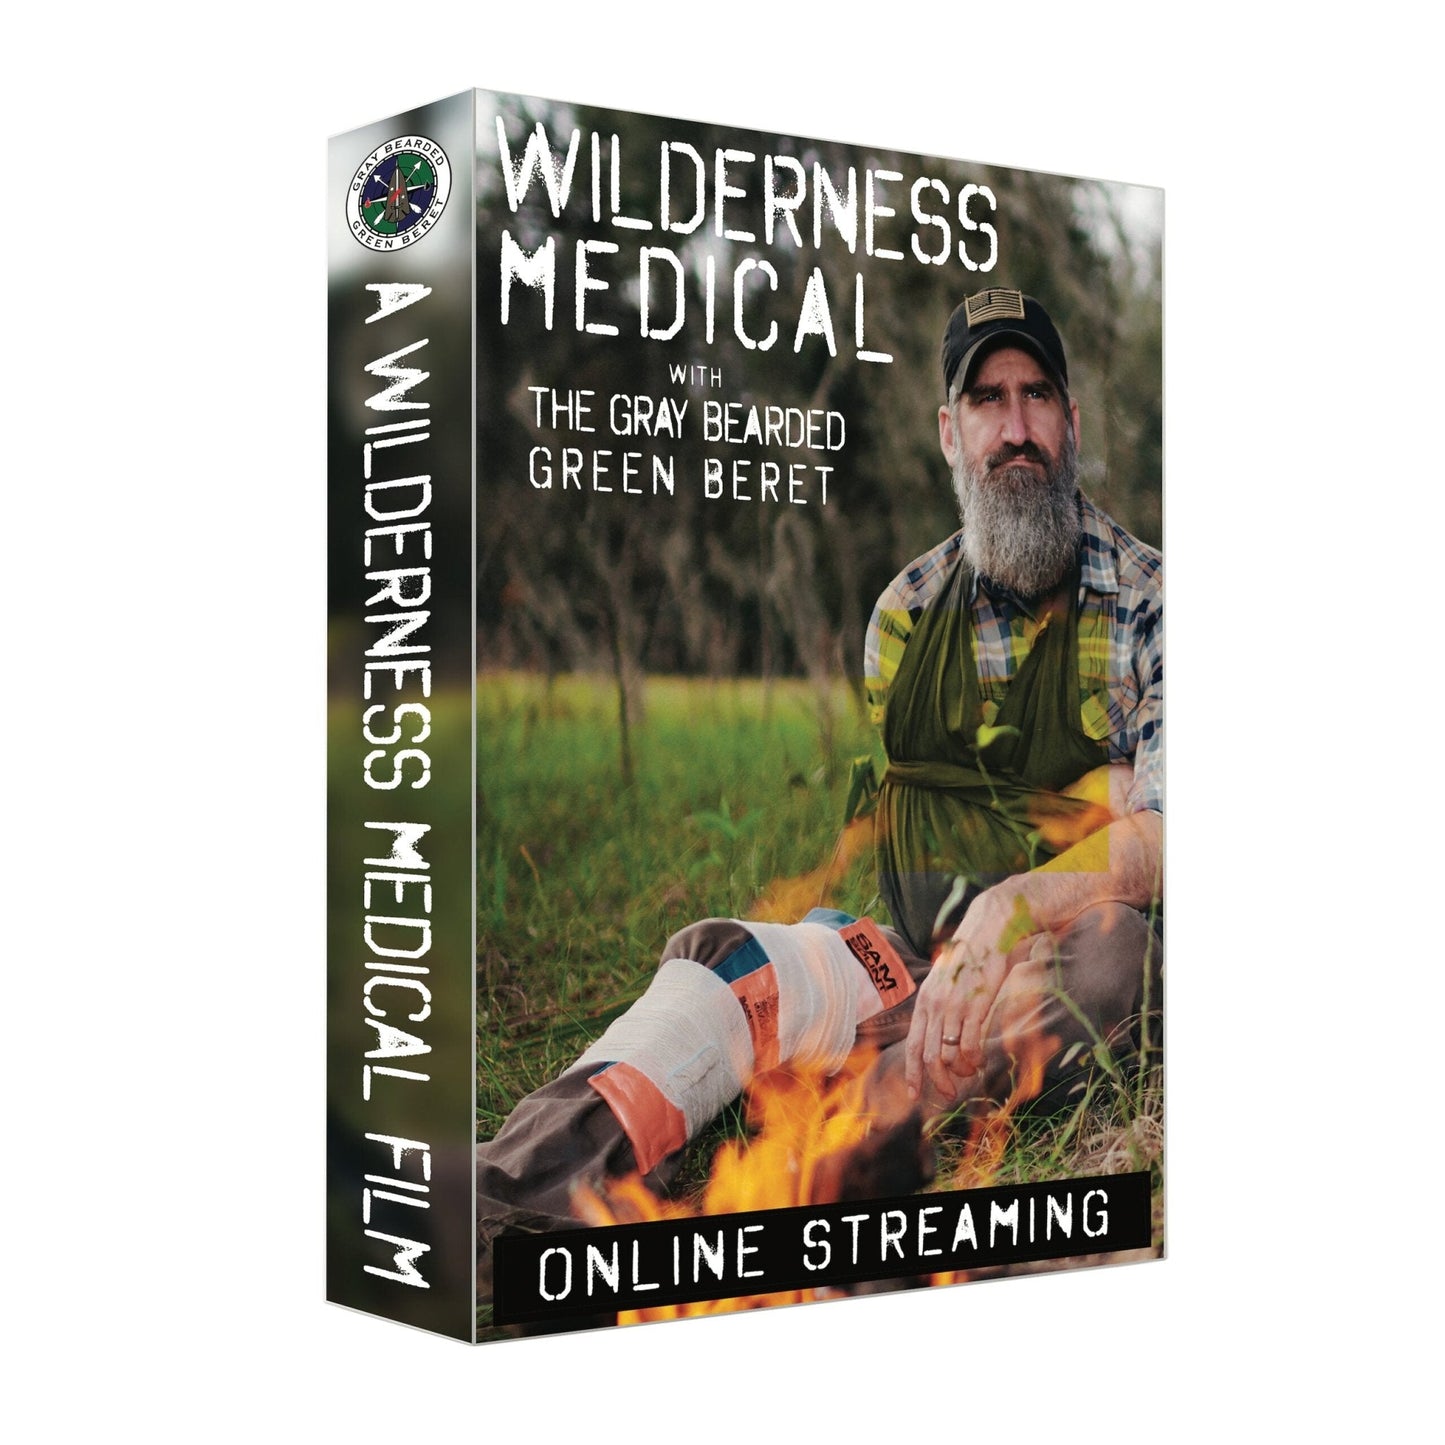 Wilderness Medical DVD + Free Streaming Limited Offer - Gray Bearded Green Beret